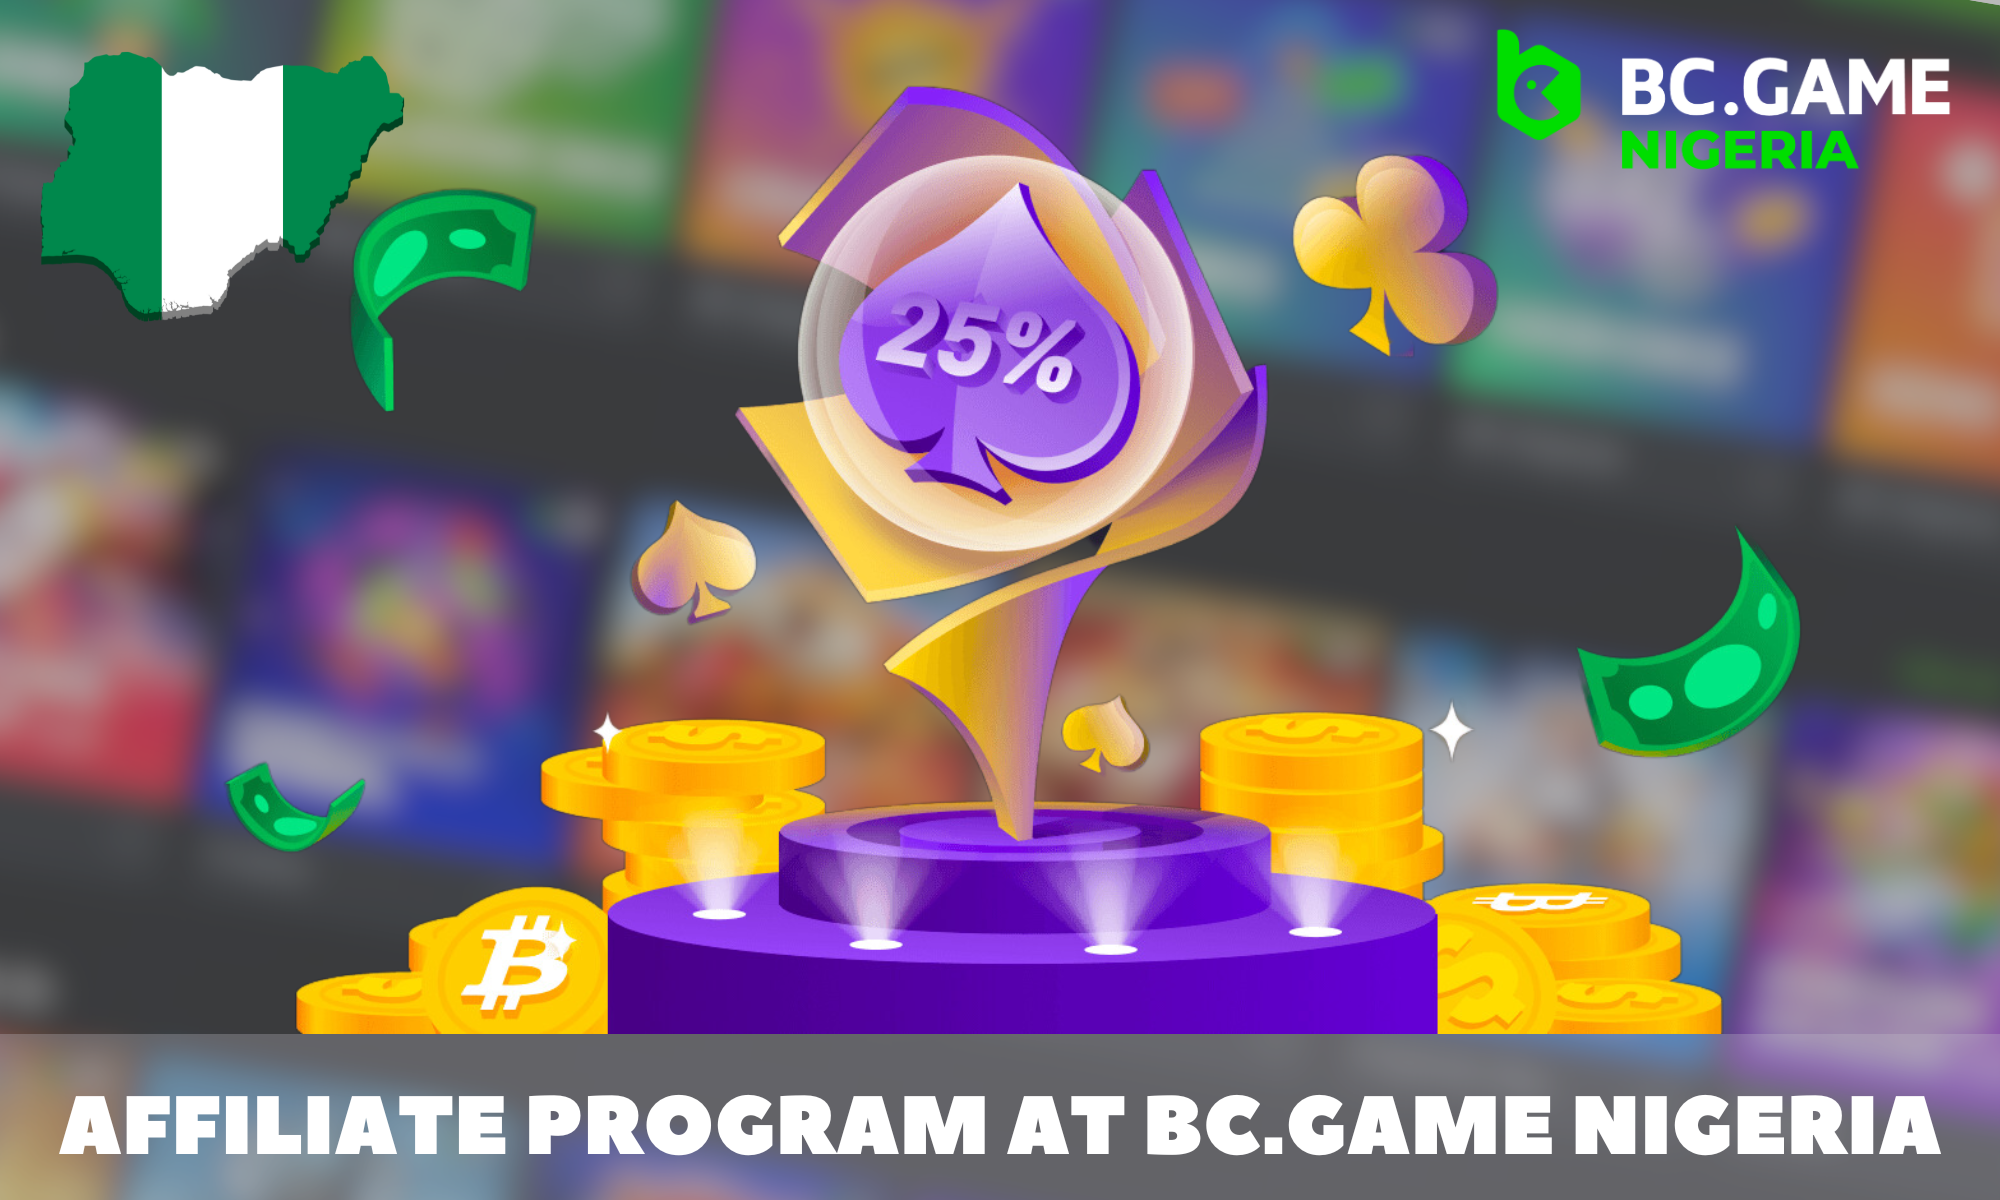 BC.GAME Nigeria has an affiliate program that allows everyone who has their own source of traffic to promote casino services and make a profit from it